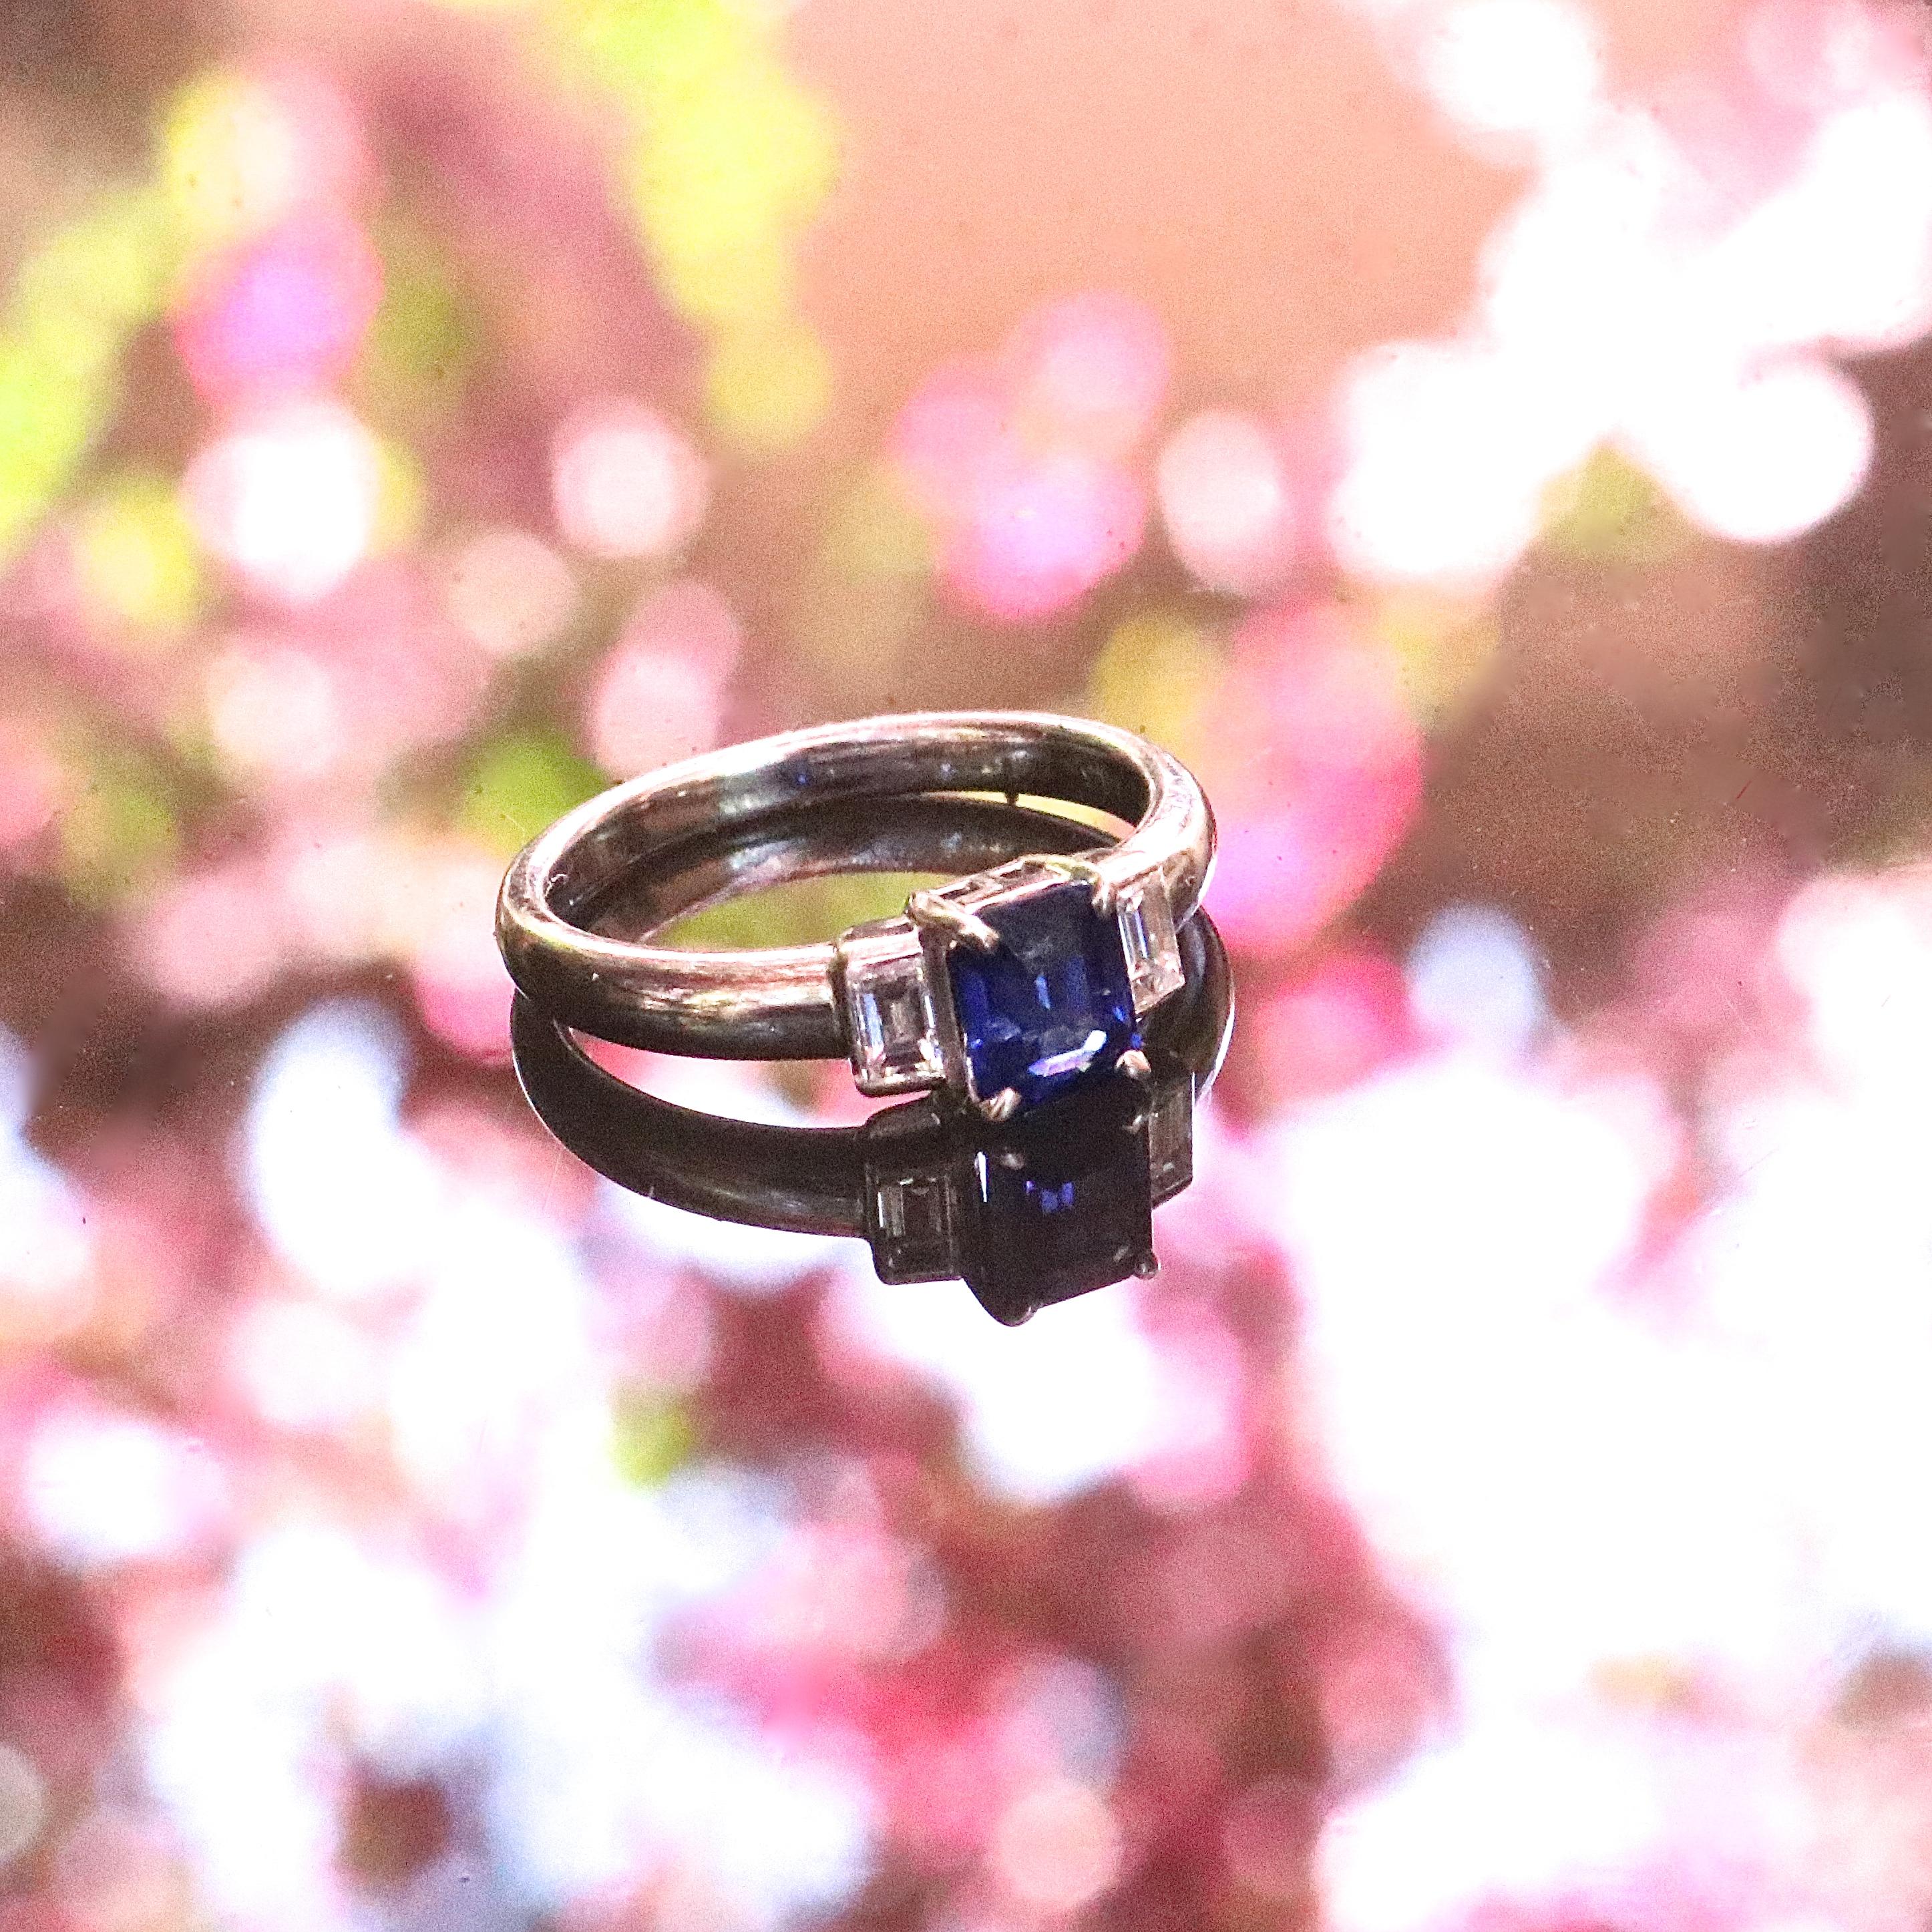 Modern 1.06 carat sapphire diamond platinum ring. With 2 baguette cut diamonds graded E-F color, VS+ clarity. Circa 2000s. Size 6 and comes with complimentary sizing if needed. 
Our 1stdibs Recognized Dealer/Platinum Seller Guarantees: 
7 day return